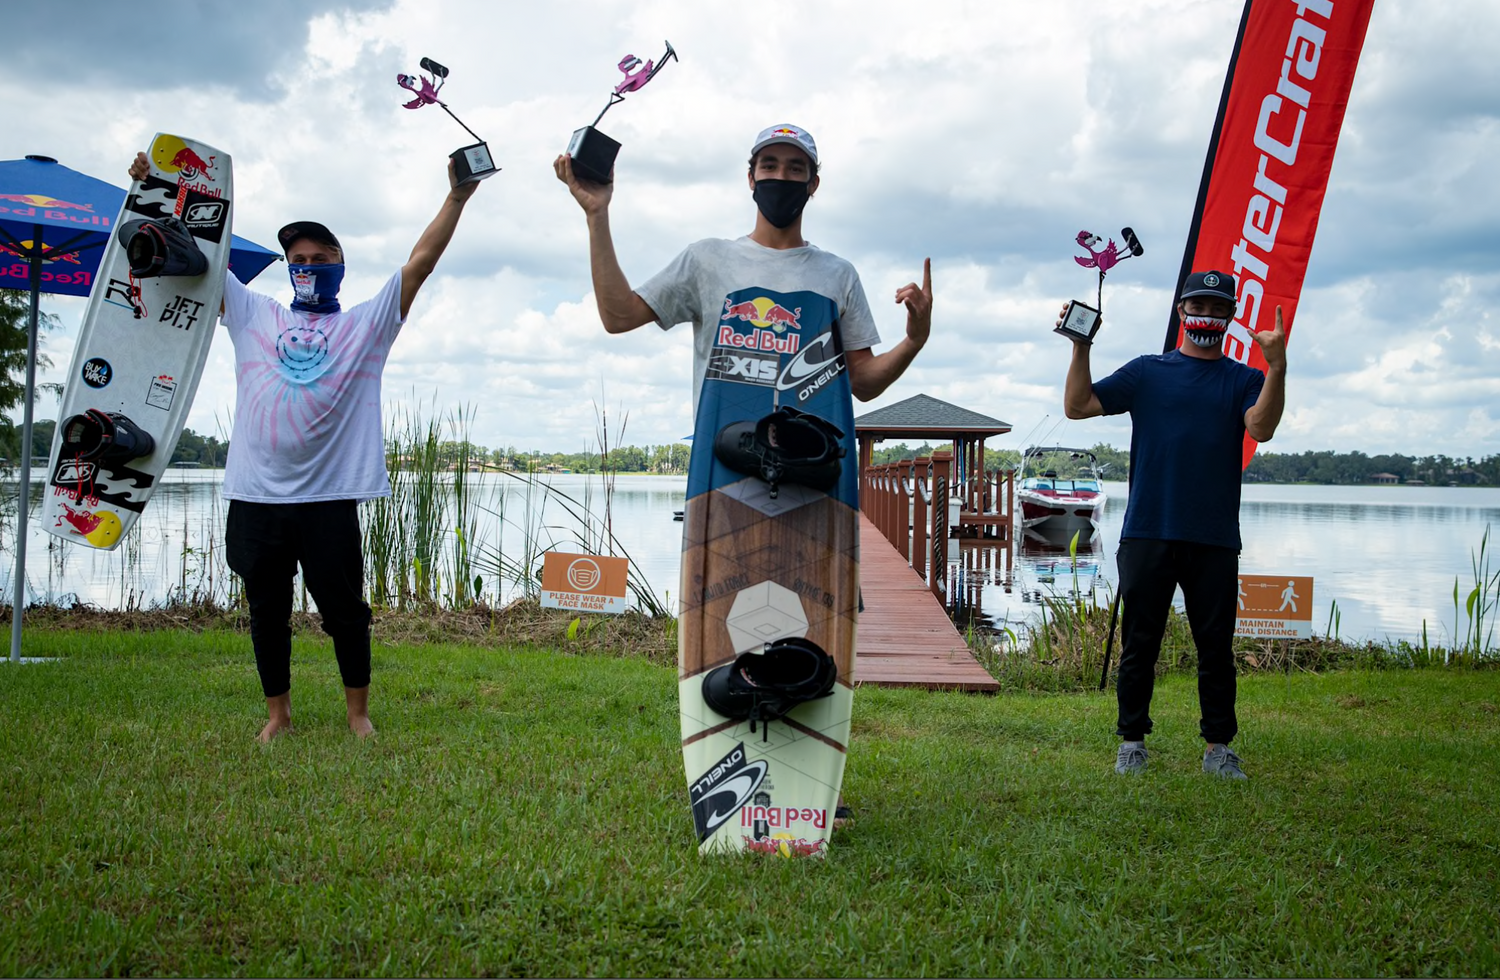 Guenther Oka Wins the Red Bull Double or Nothing Contest with Legendary Trick